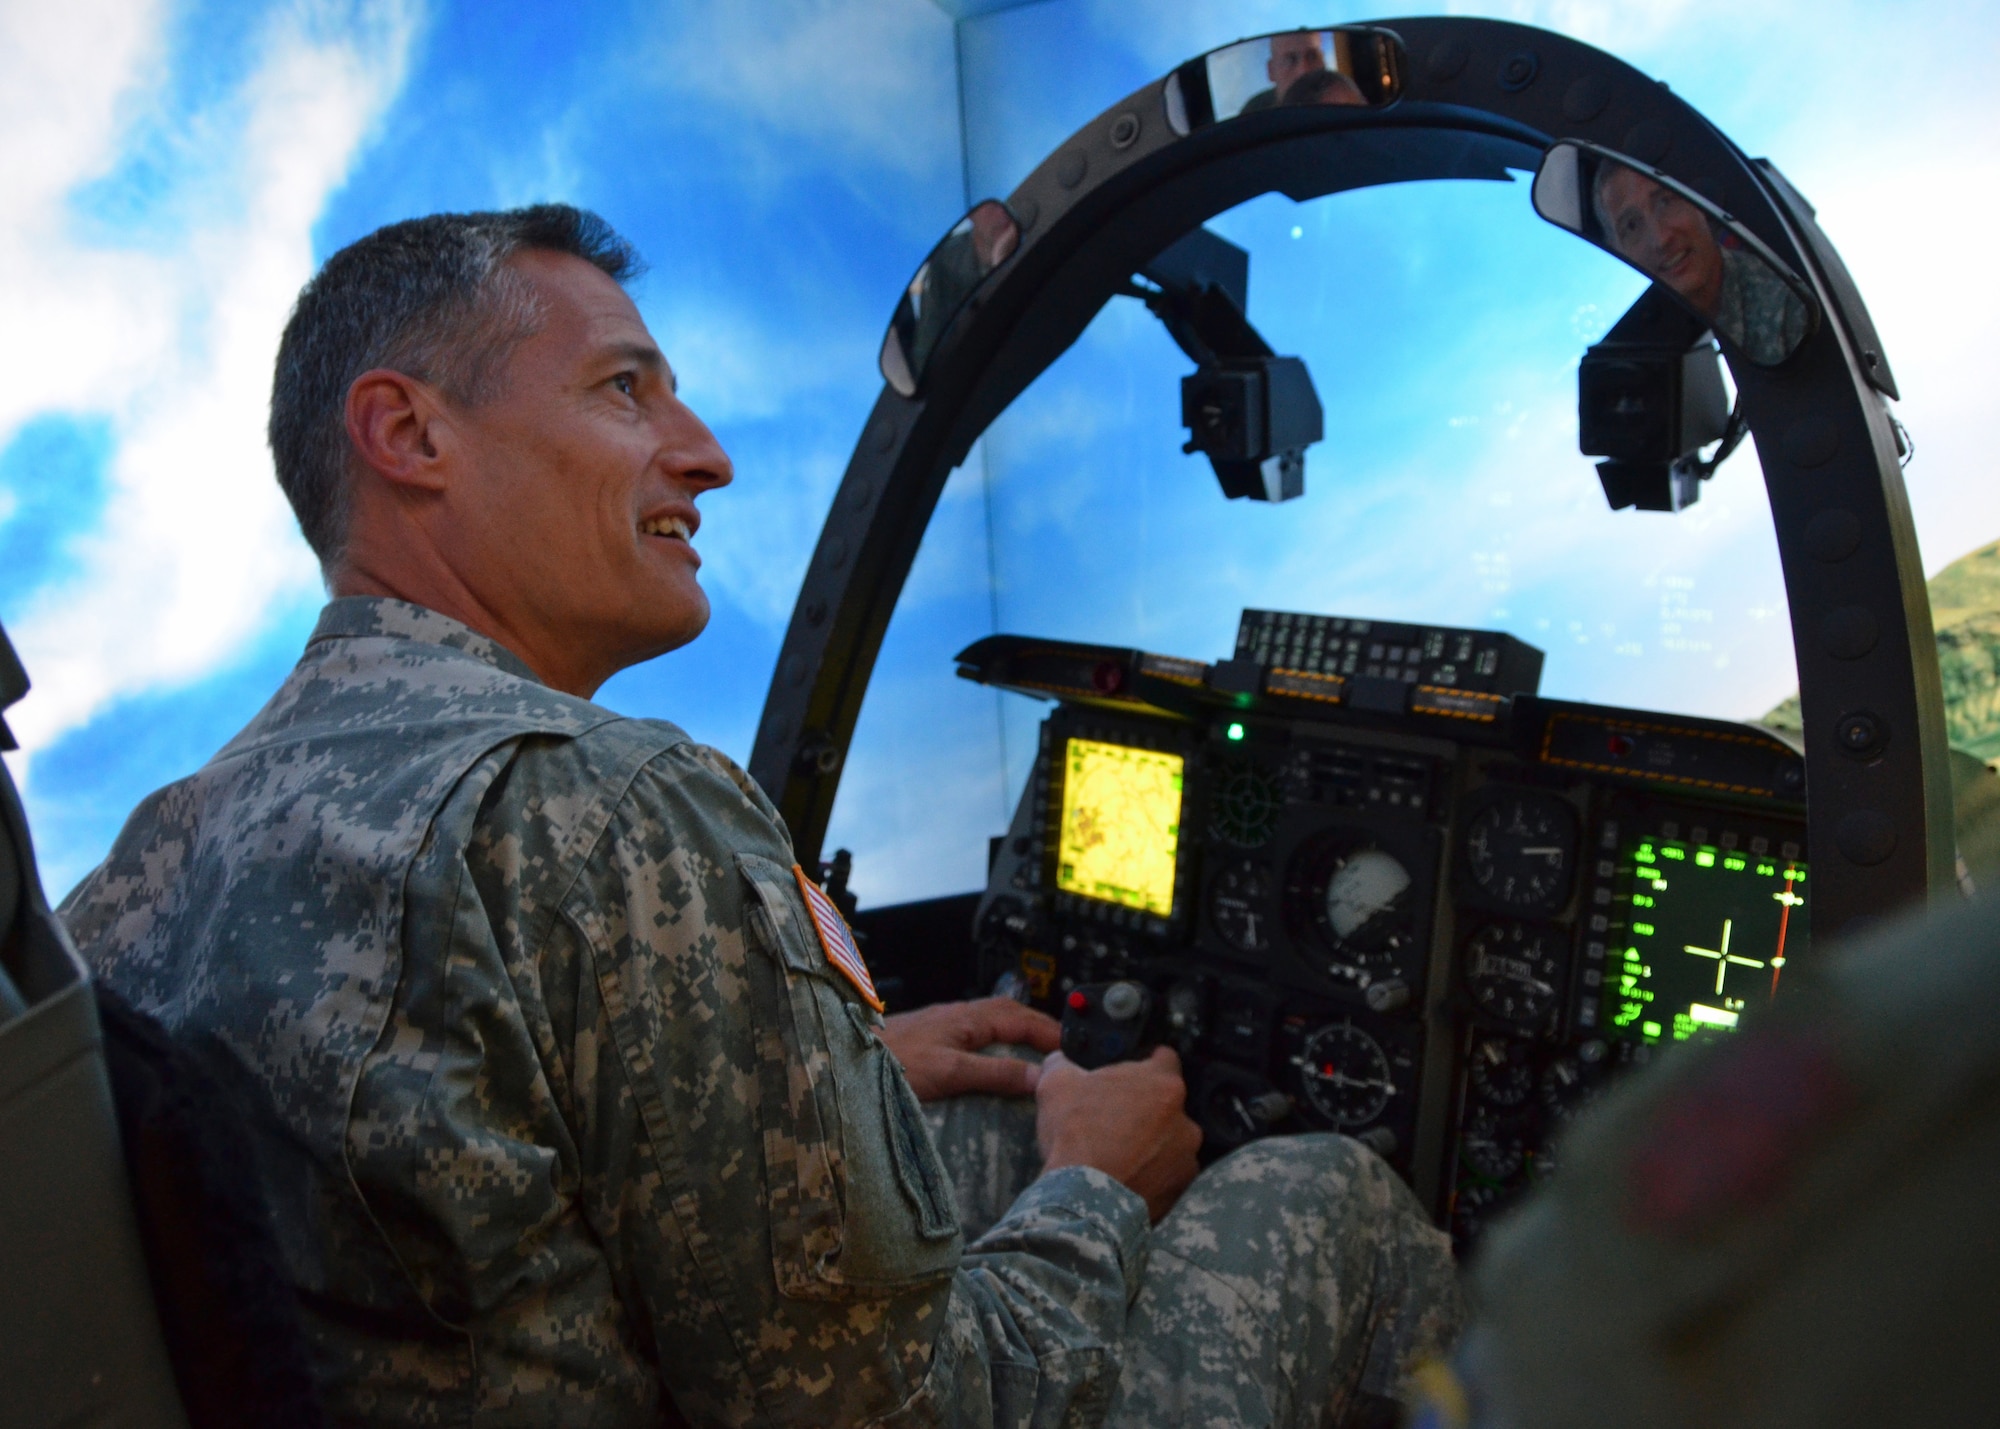 U.S. Army Lt. Gen. Ken Tovo, U.S. Southern Command military deputy commander, flies a mission in the A-10 Thunderbolt II simulator Monday at Davis-Monthan Air Force Base, Ariz.  General Tovo visited Davis-Monthan for an orientation at 12th Air Force (Air Forces Southern) and to thank 12 AF (AFSOUTH) Airmen for their contributions as the air component to U.S. Southern Command. (U.S. Air Force photo/Capt. Justin Brockhoff)